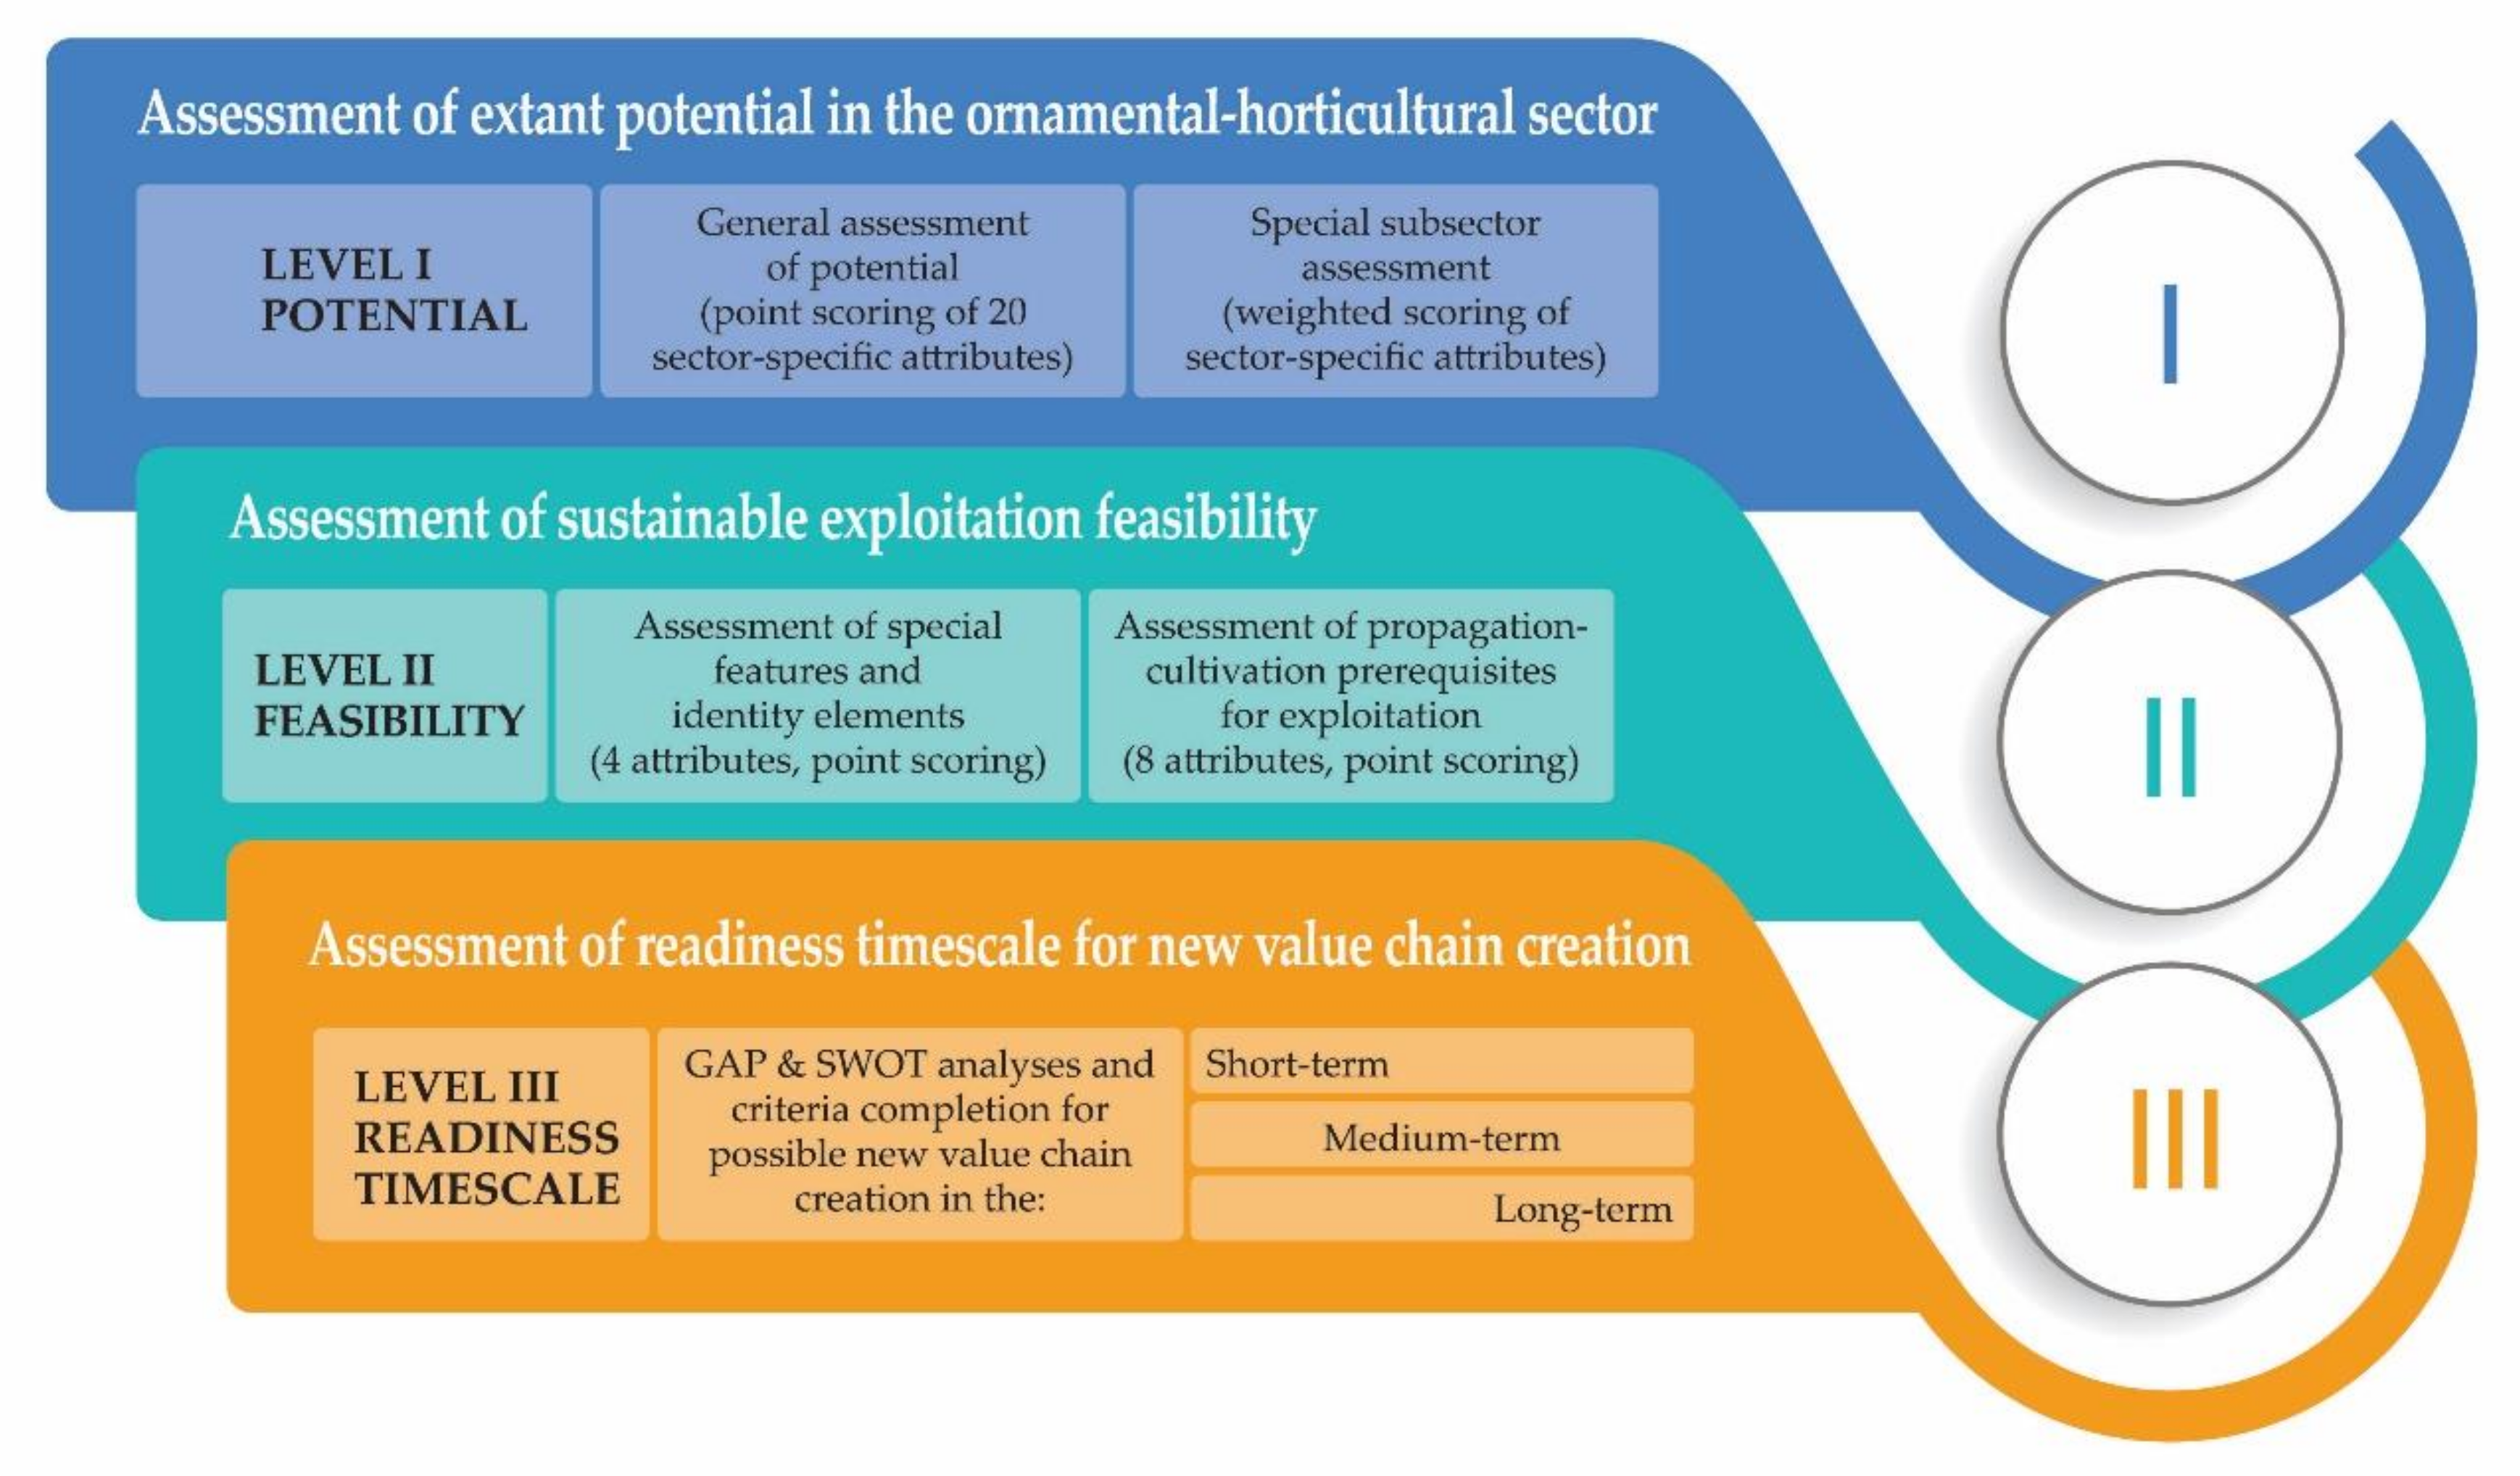 Sustainability | Free Full-Text | Exploring the Potential of Neglected  Local Endemic Plants of Three Mediterranean Regions in the Ornamental  Sector: Value Chain Feasibility and Readiness Timescale for Their  Sustainable Exploitation | HTML